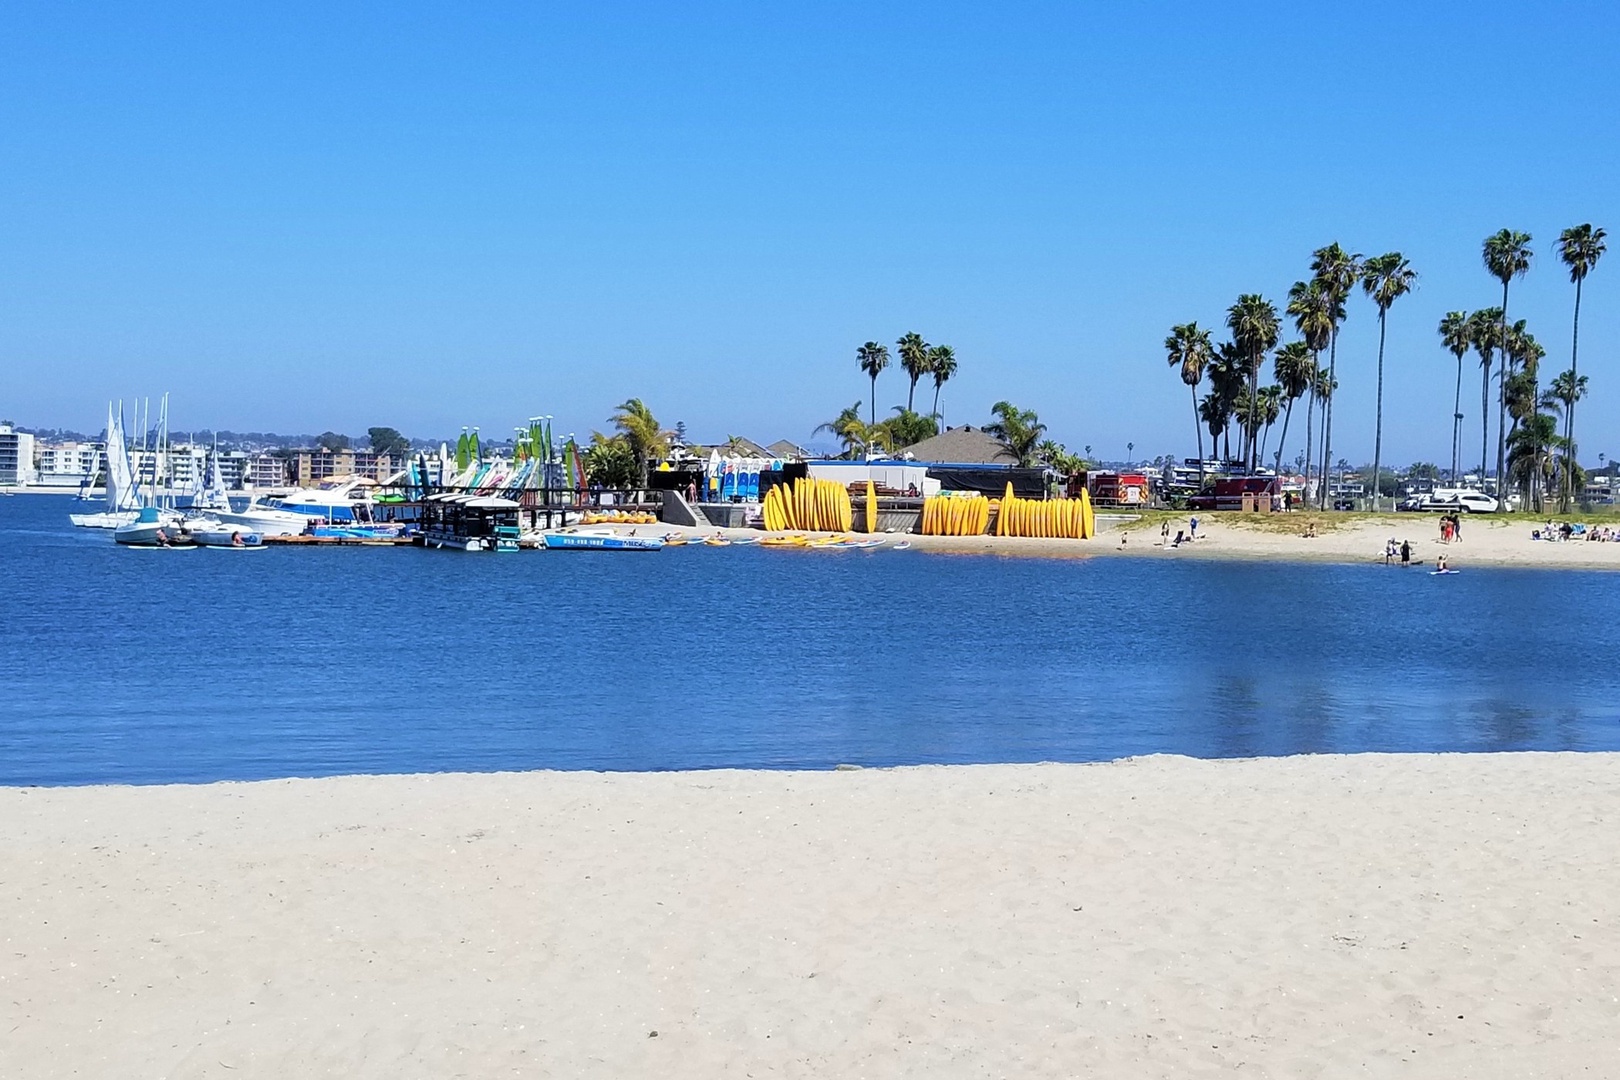 Water sports and boat rentals nearby